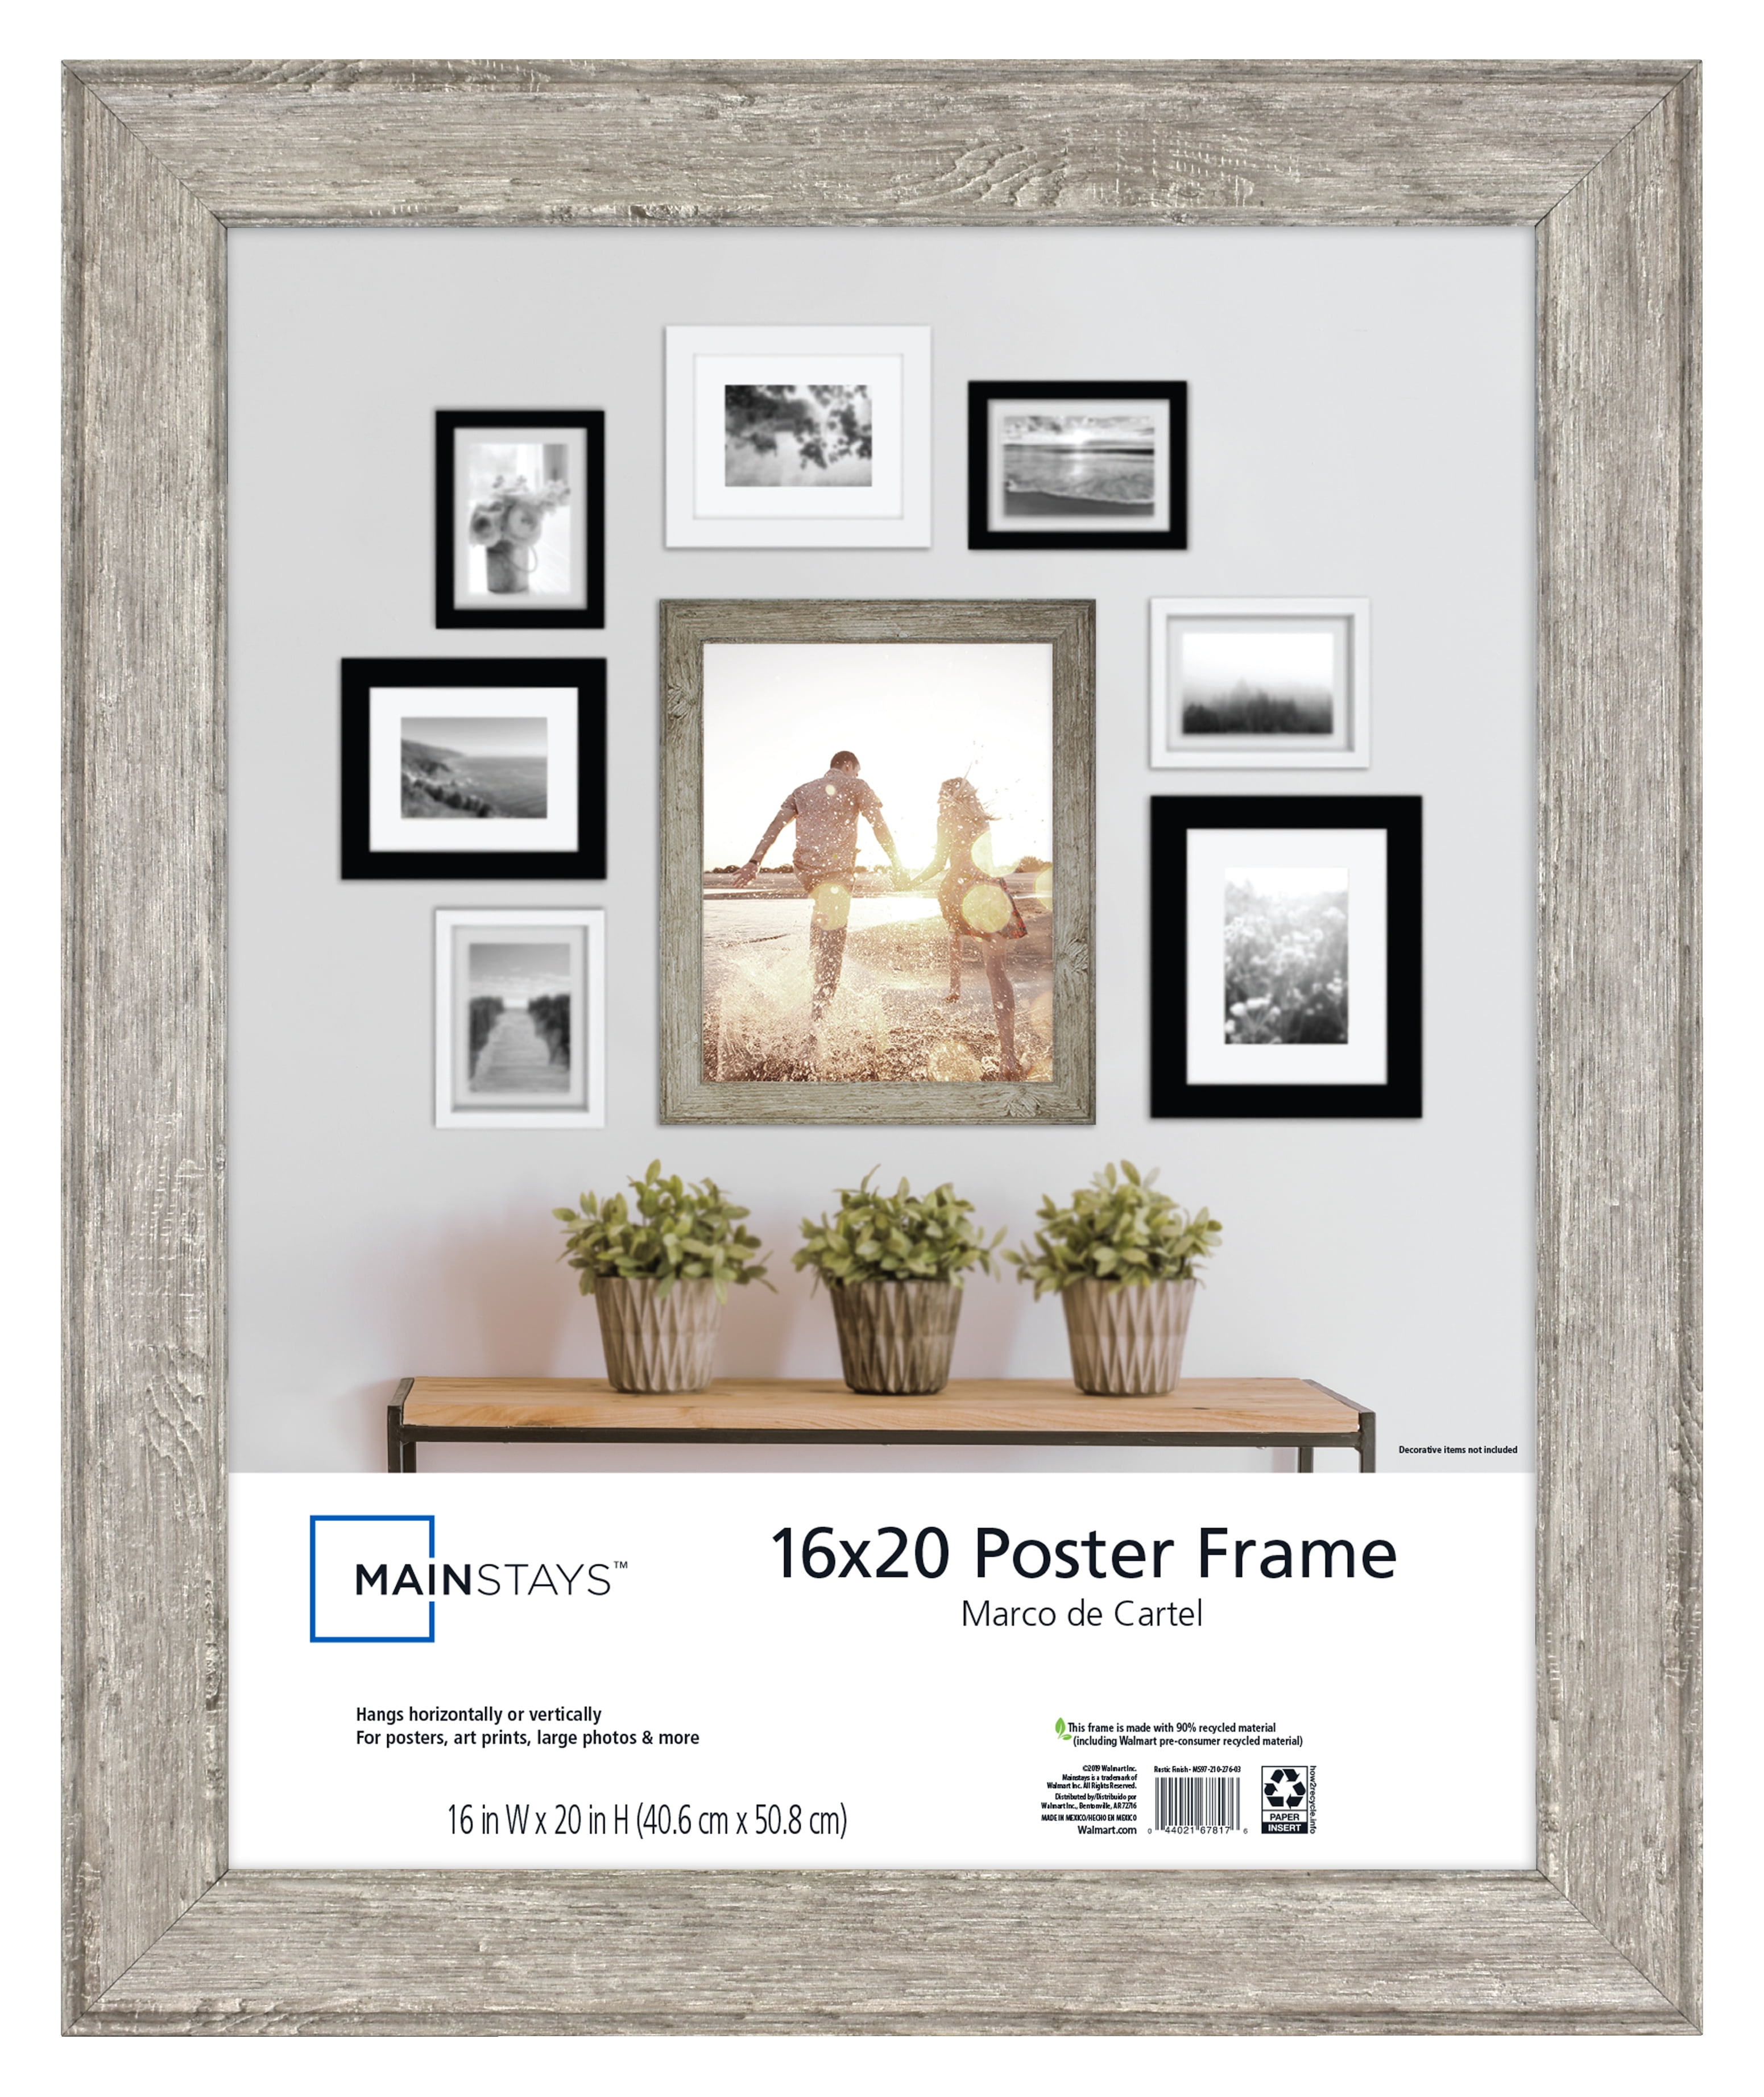 Details about   Ornate Shabby Chic Picture Photo Frame Poster frame with Bespoke Mount Black